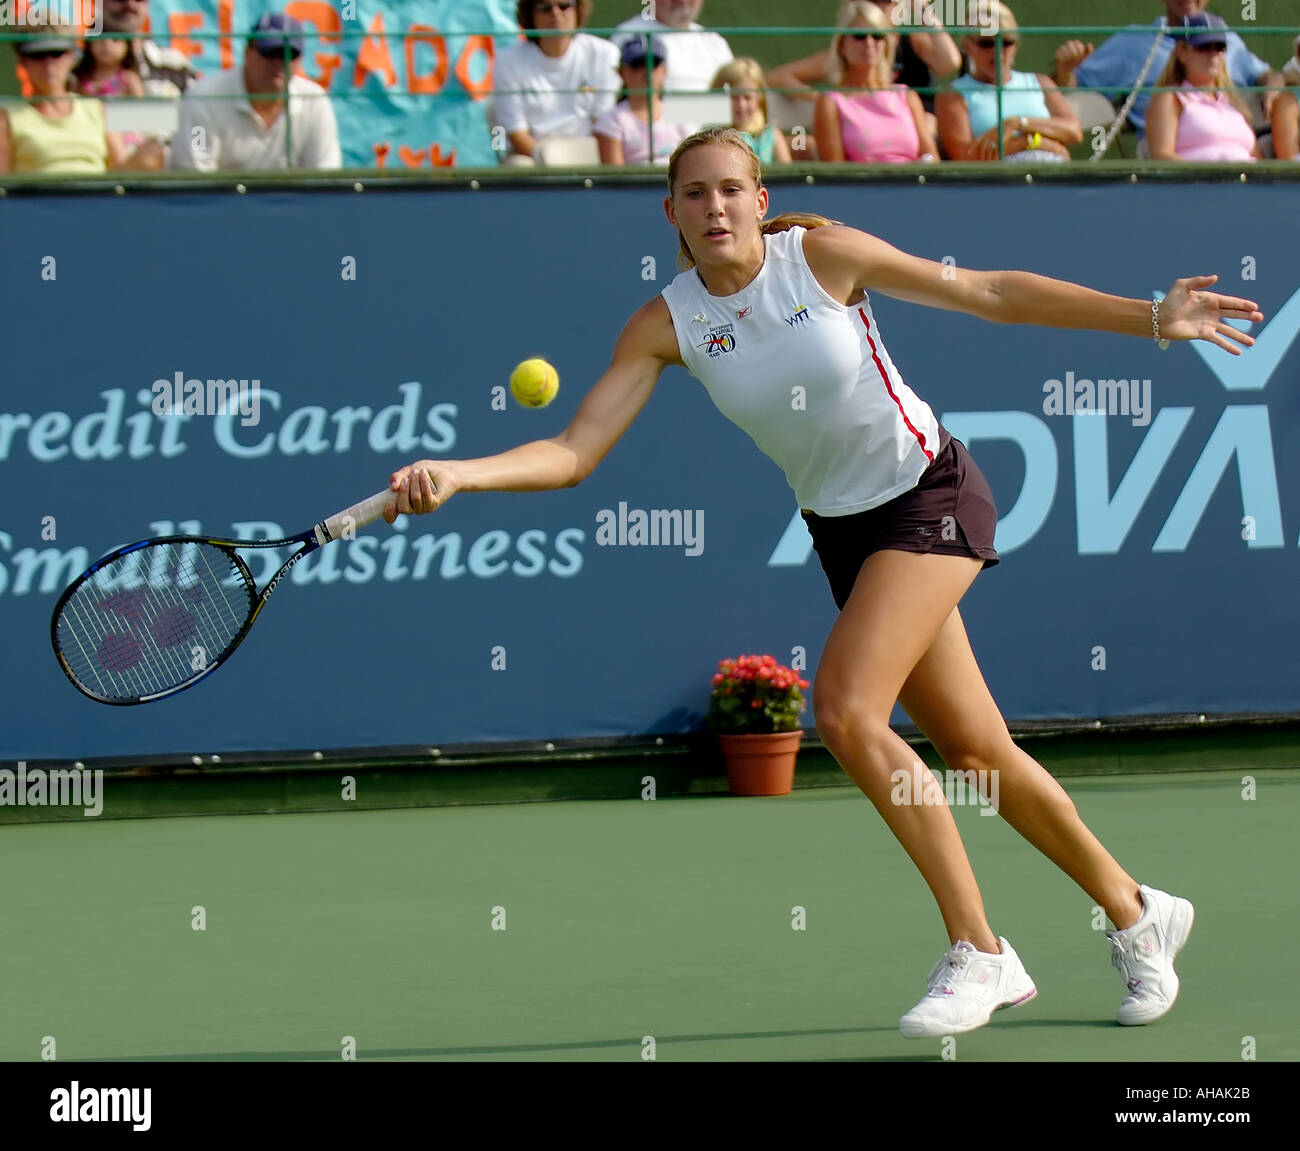 WTA professional tennis player Nicole Vaidisova hits a return to her opponent in WTT tennis Stock Photo